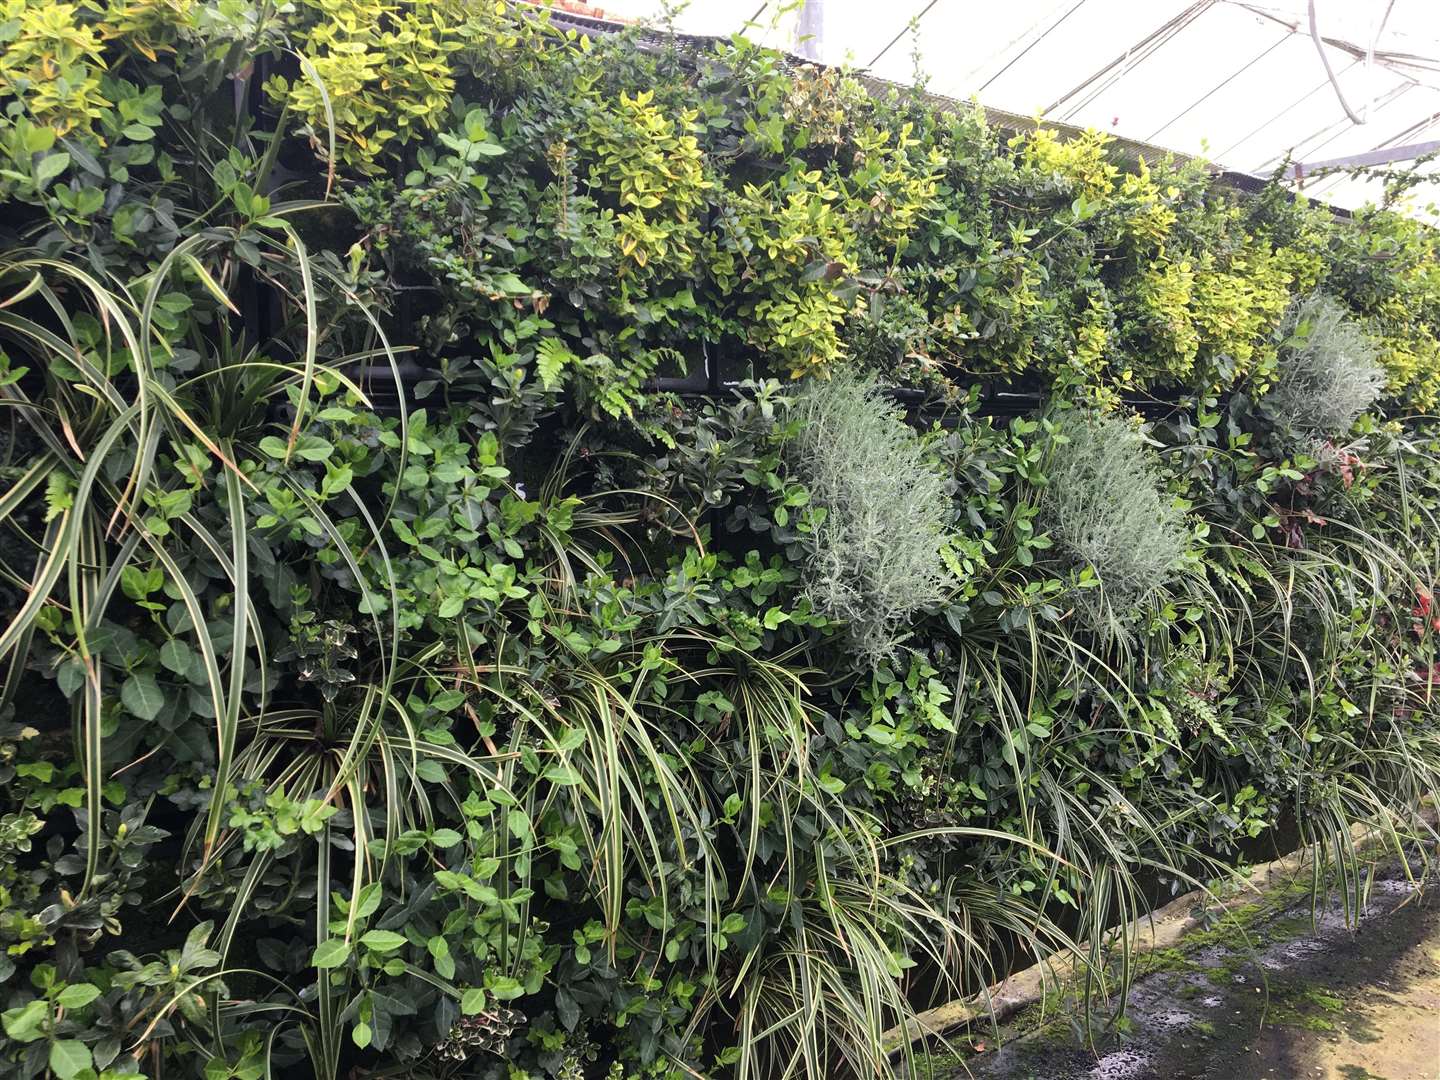 Exclusive pictures show the work being done by Biotecture on Ashford Designer Outlet's living wall